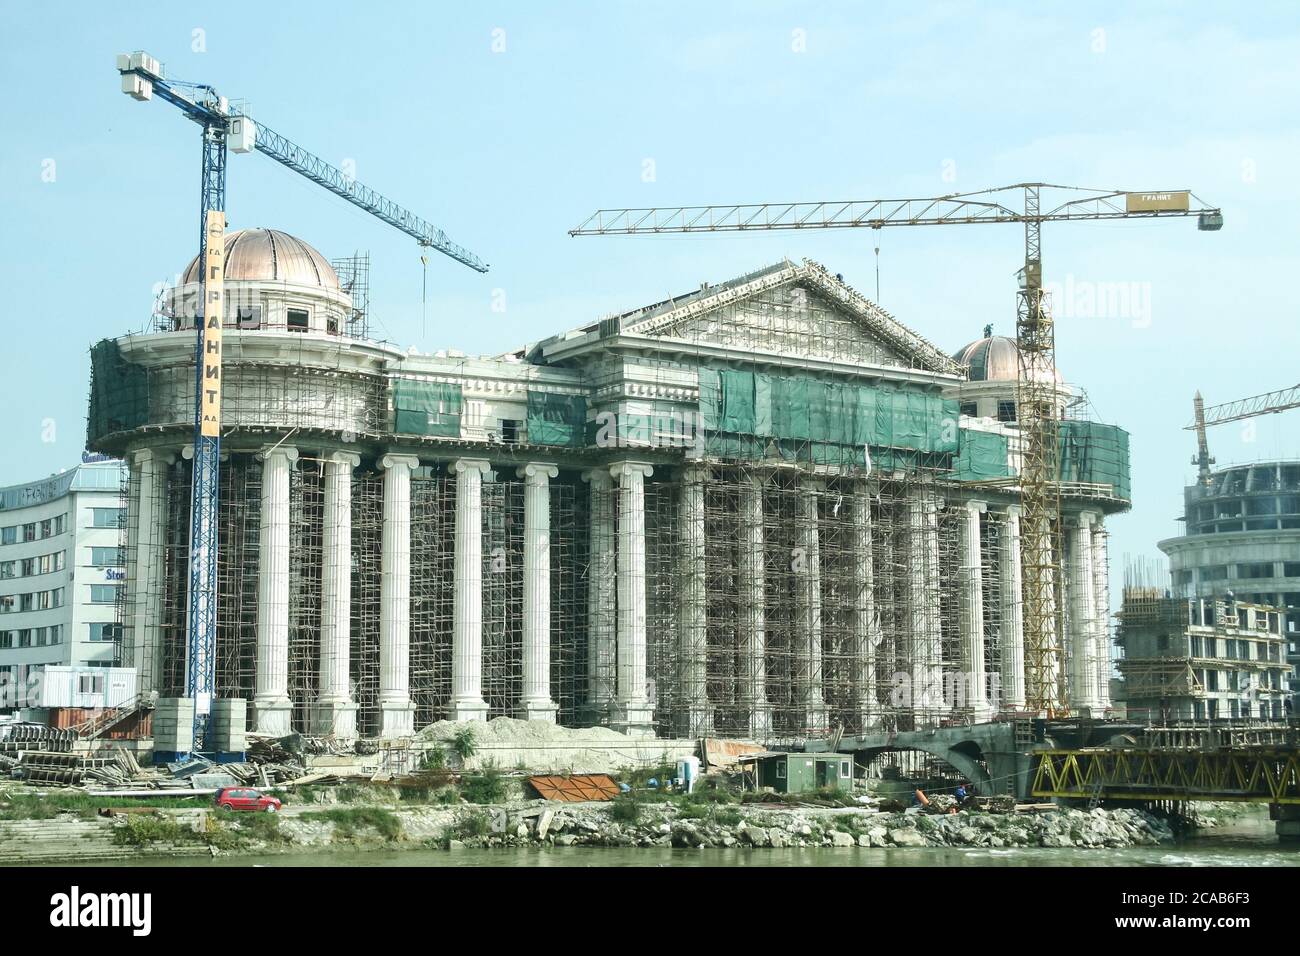 SKOPJE, MACEDONIA - OCTOBER 25, 2011: Construction site of the Archeological museum. Part of the Skopje 2014 project the Archaeological museum is a sy Stock Photo